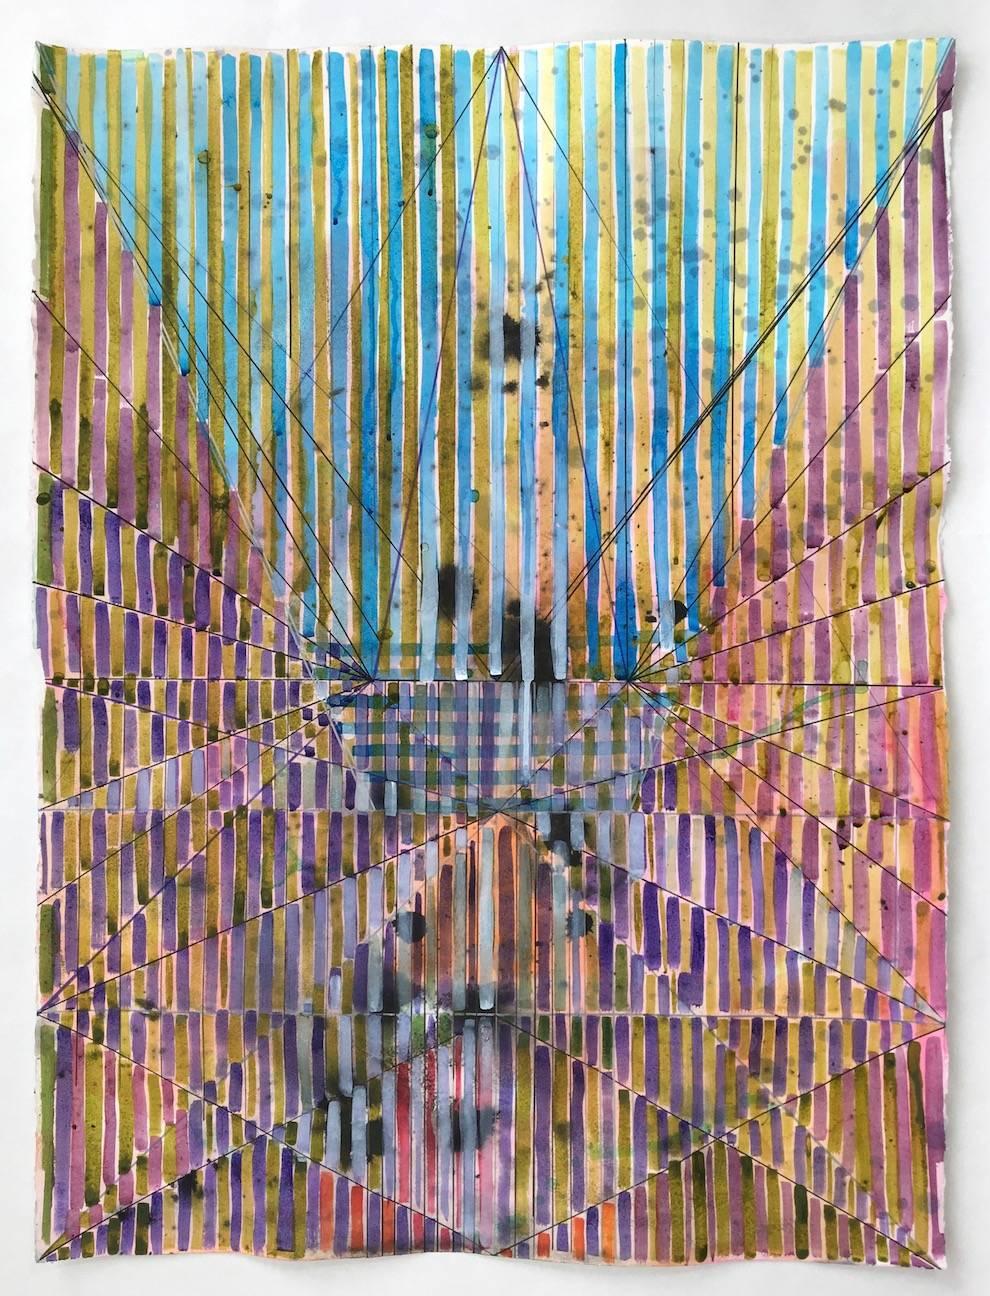 Joe Lloyd, Blue and Purple Grid, 2017, acrylic on paper, 30 x 22 inches is a colorful geometric abstract work on paper with highlights of rose, violet and turquoise. The hard edges of the geometric framework are complimented by the translucent